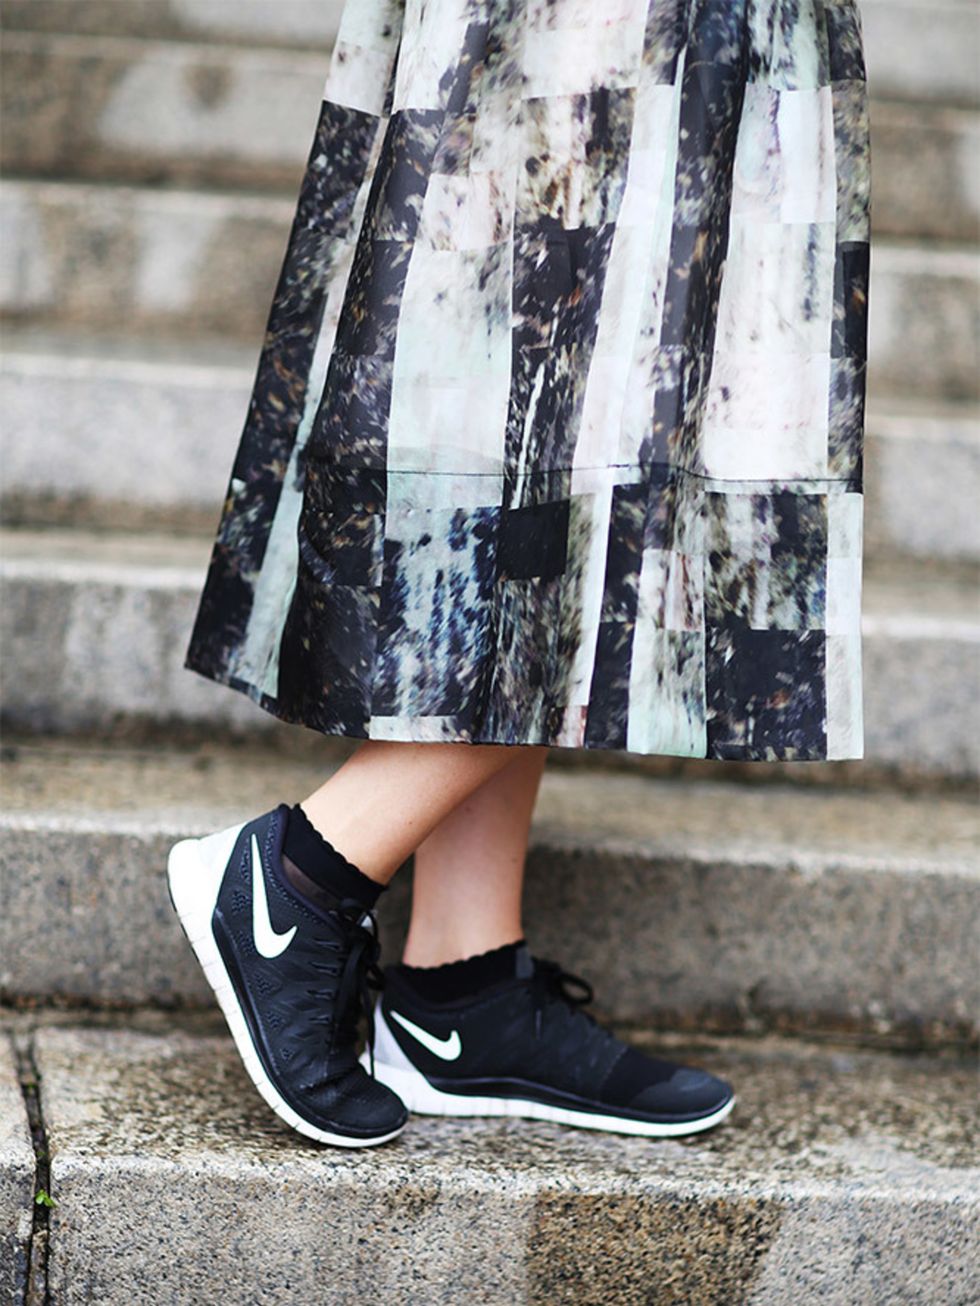 <p>Kirsty Dale  Executive Fashion and Beauty Director</p>

<p>Zara jacket, Whistles skirt, Nike trainers.</p>